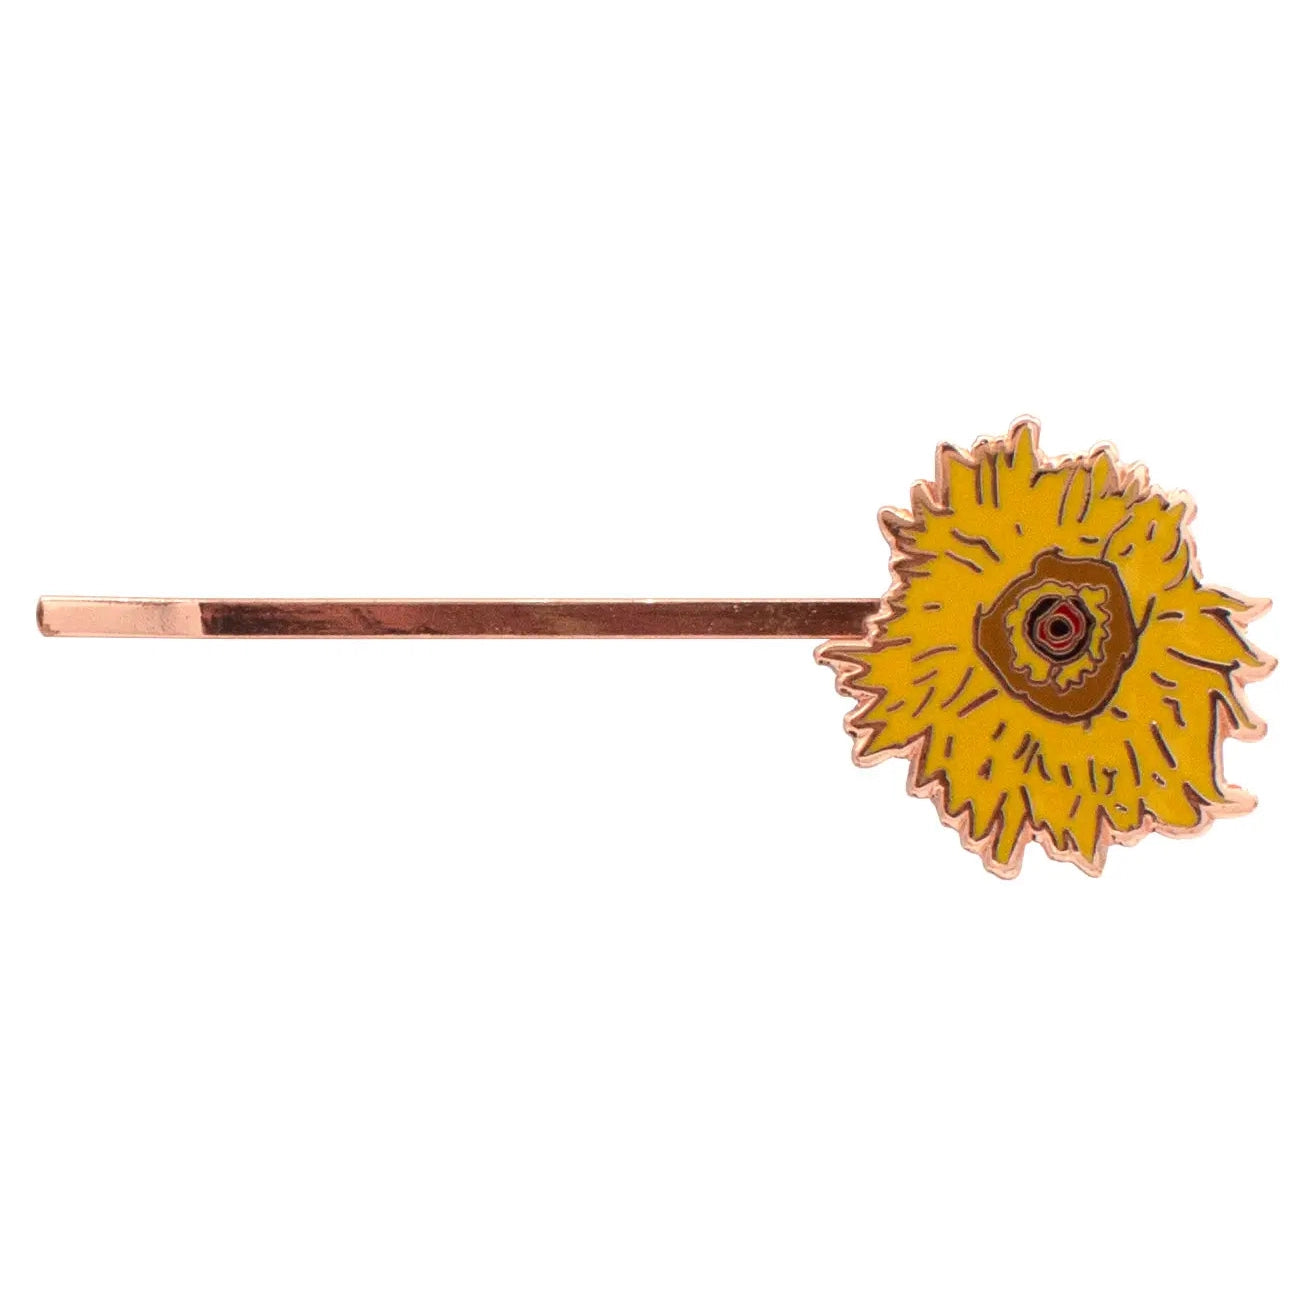 Great Flowers Of Art Hair Pins | Set of 3 | Flowers Painted by Van Gogh, O'Keefe, and Monet